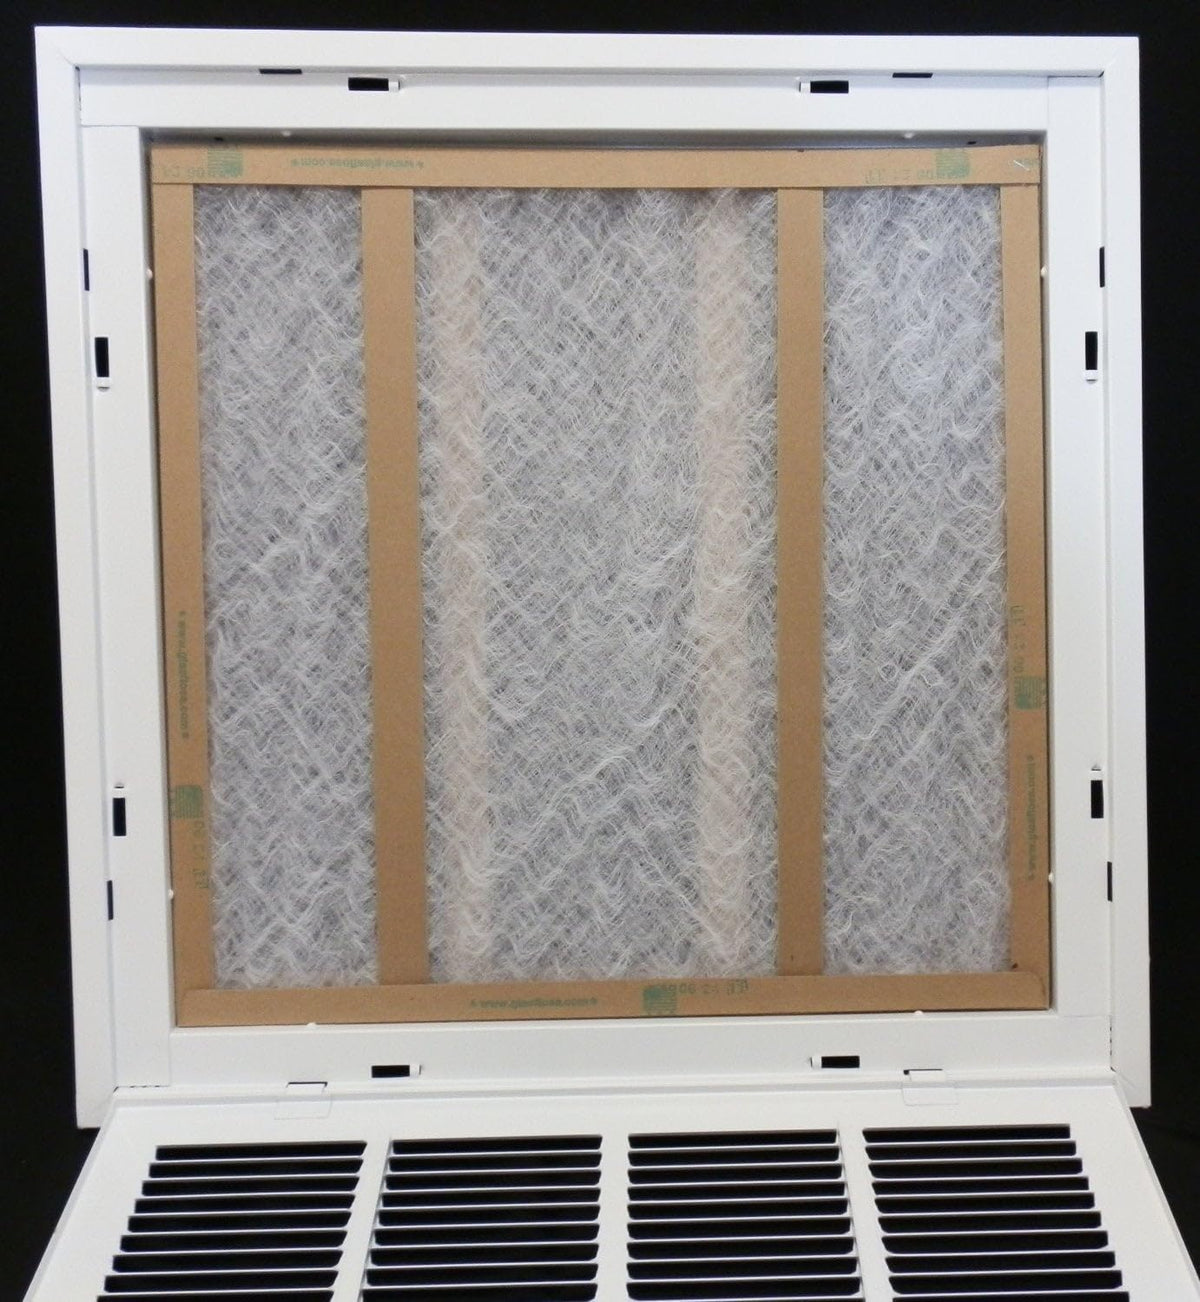 14&quot; X 10&quot; Steel Return Air Filter Grille for 1&quot; Filter - Fixed Hinged - [Outer Dimensions: 16 5/8&quot; X 12 5/8&quot;]